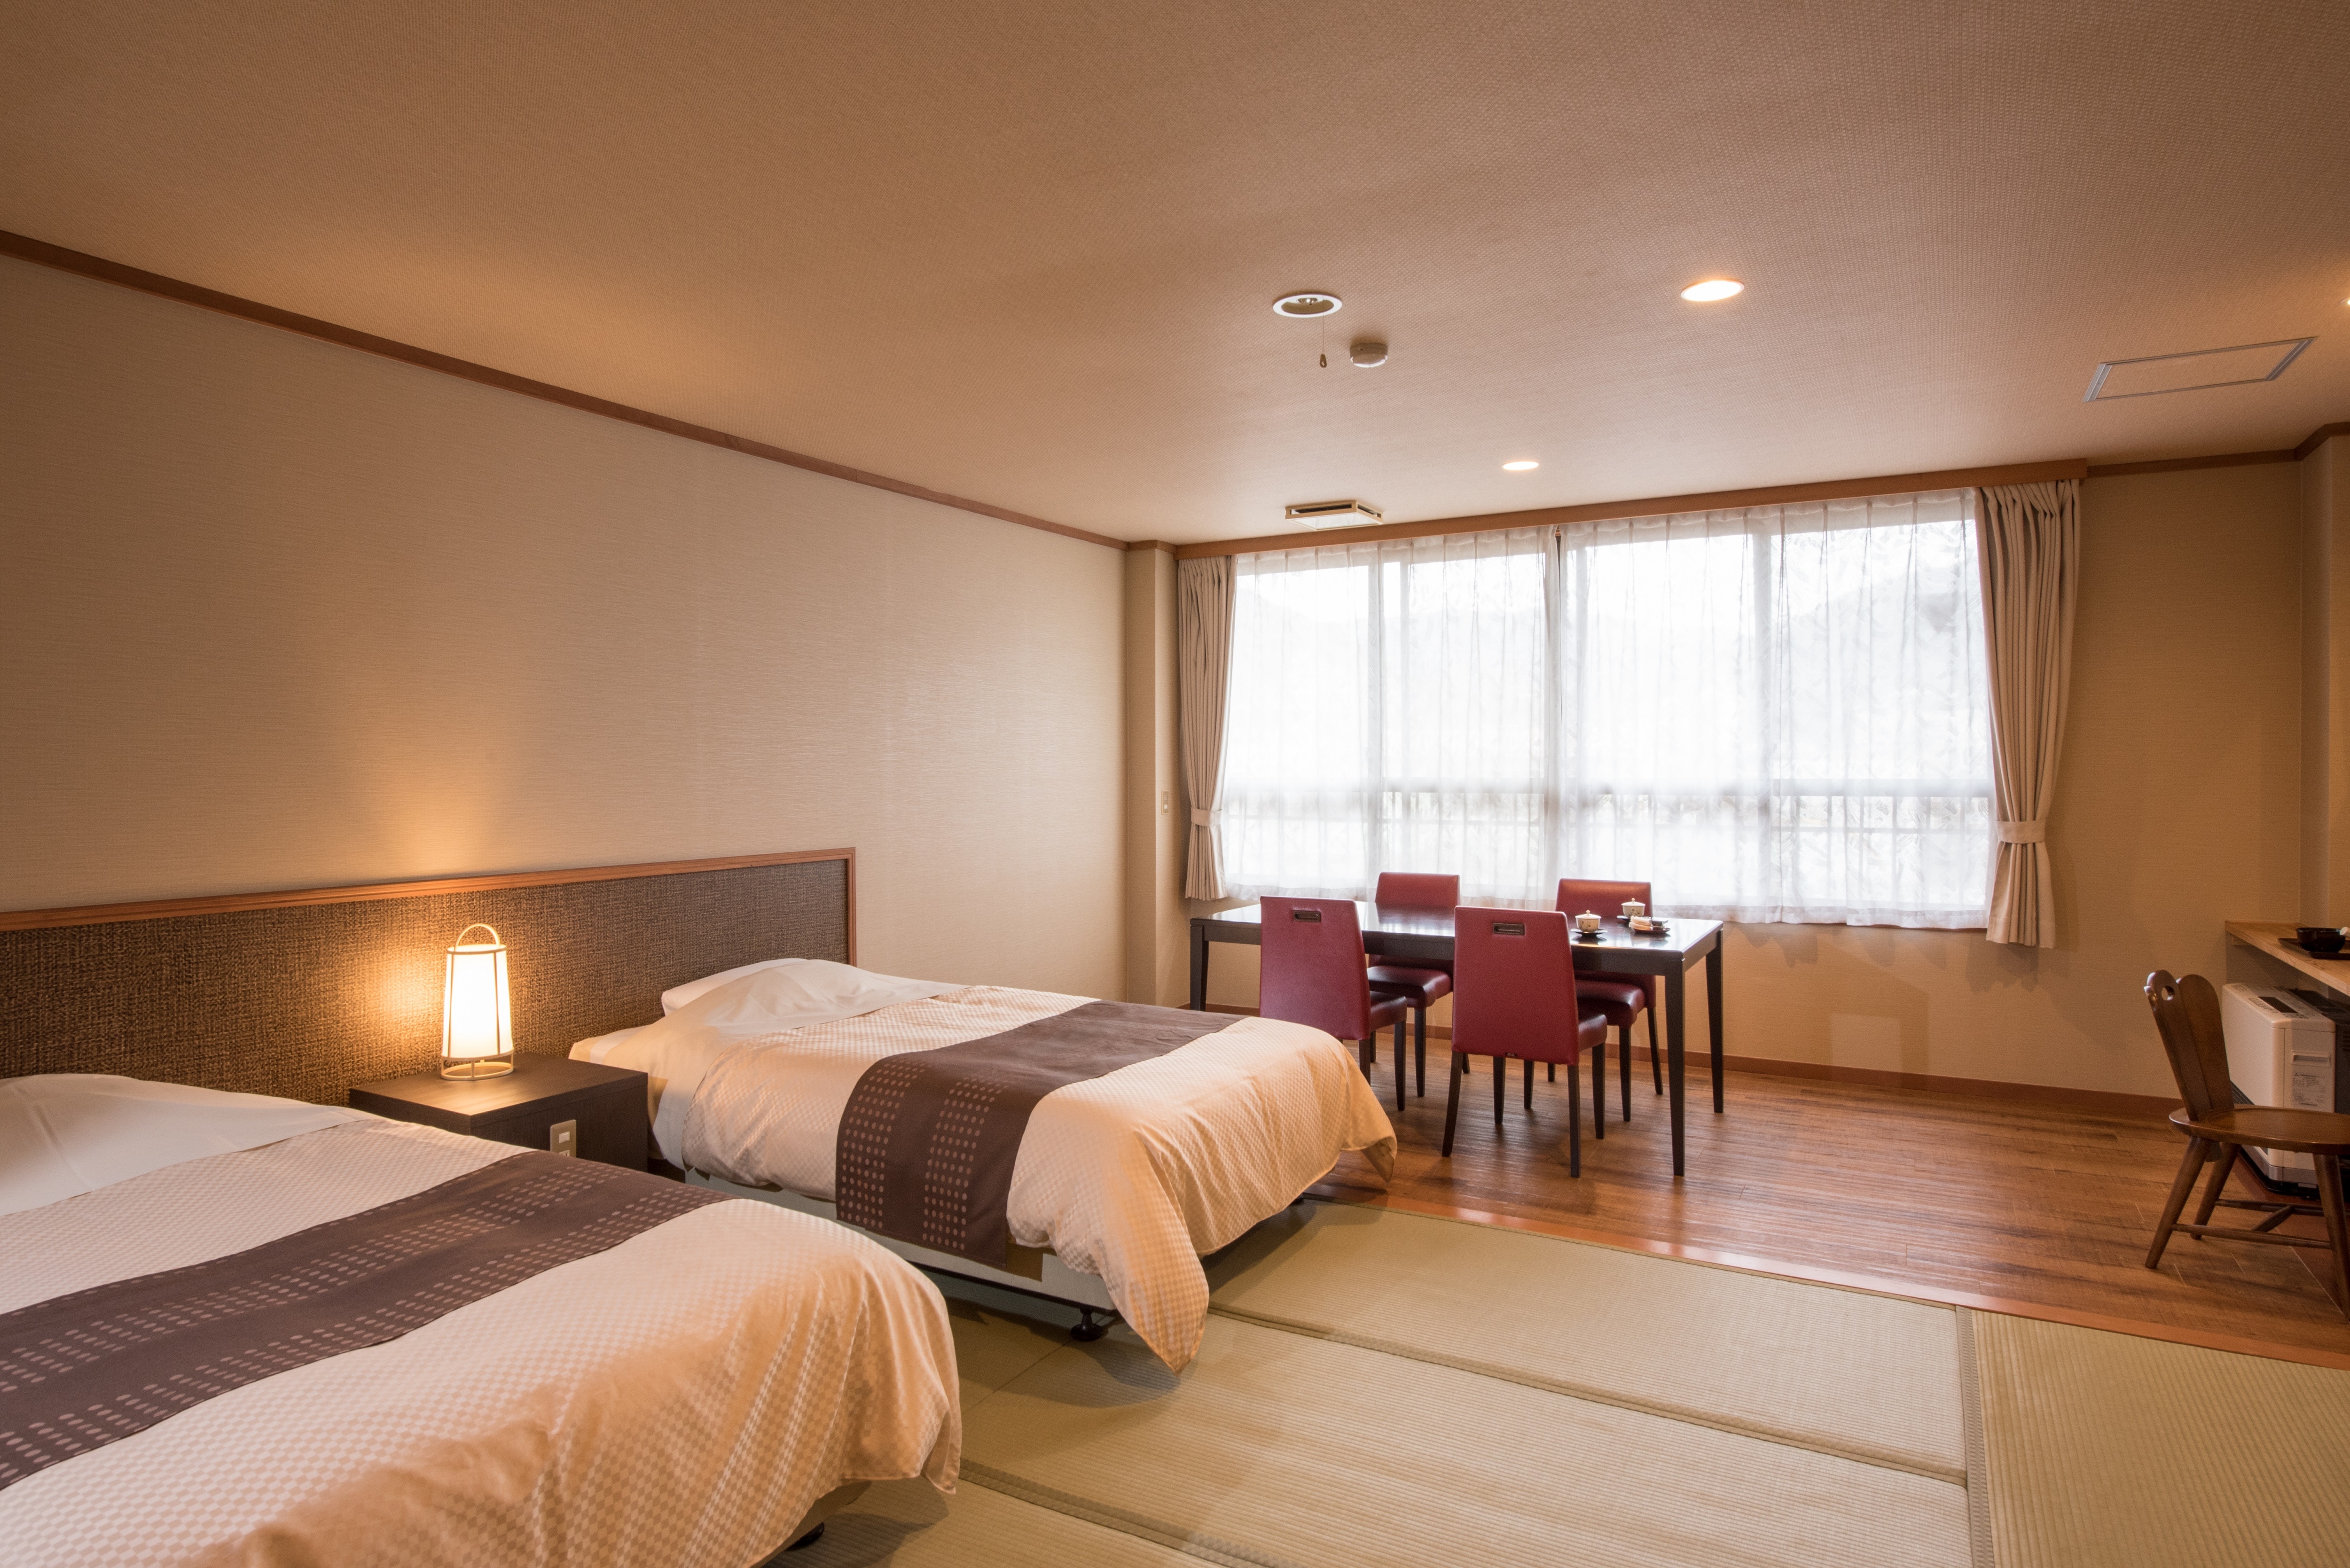 Non-smoking room Japanese-style room 10 tatami mats 2 beds + dining table (with toilet)